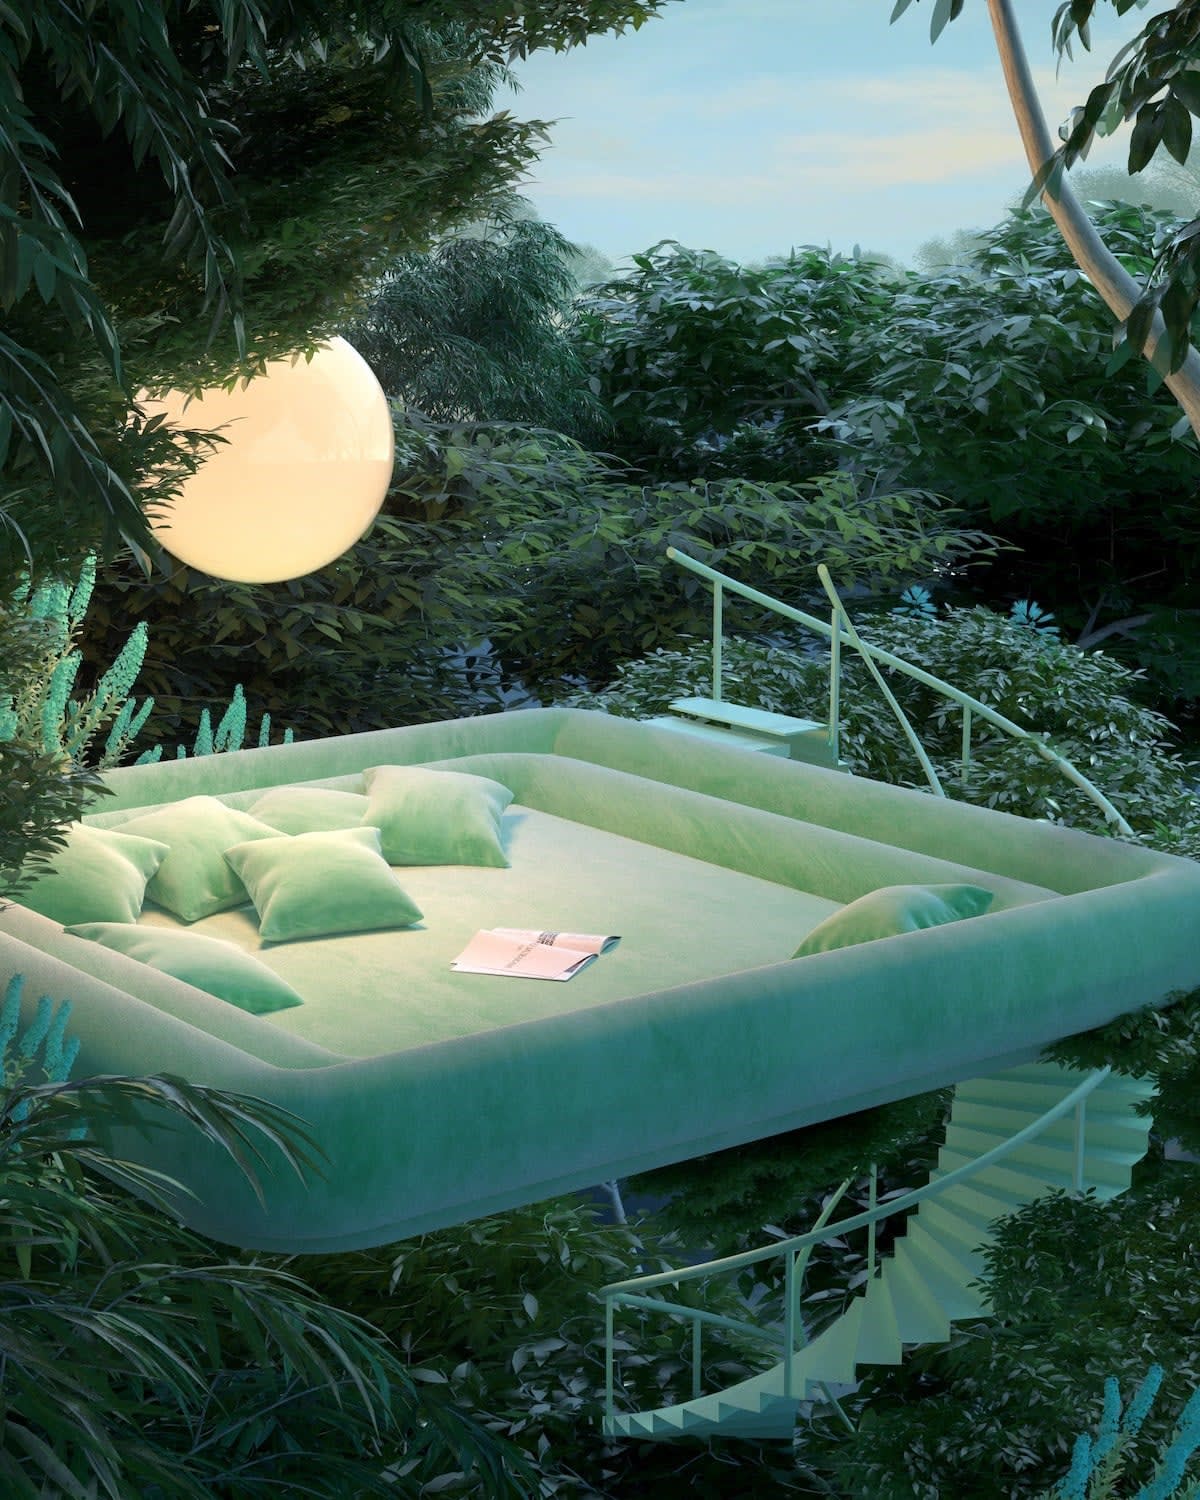 'Peppermint Gardens', a virtual cosy place.